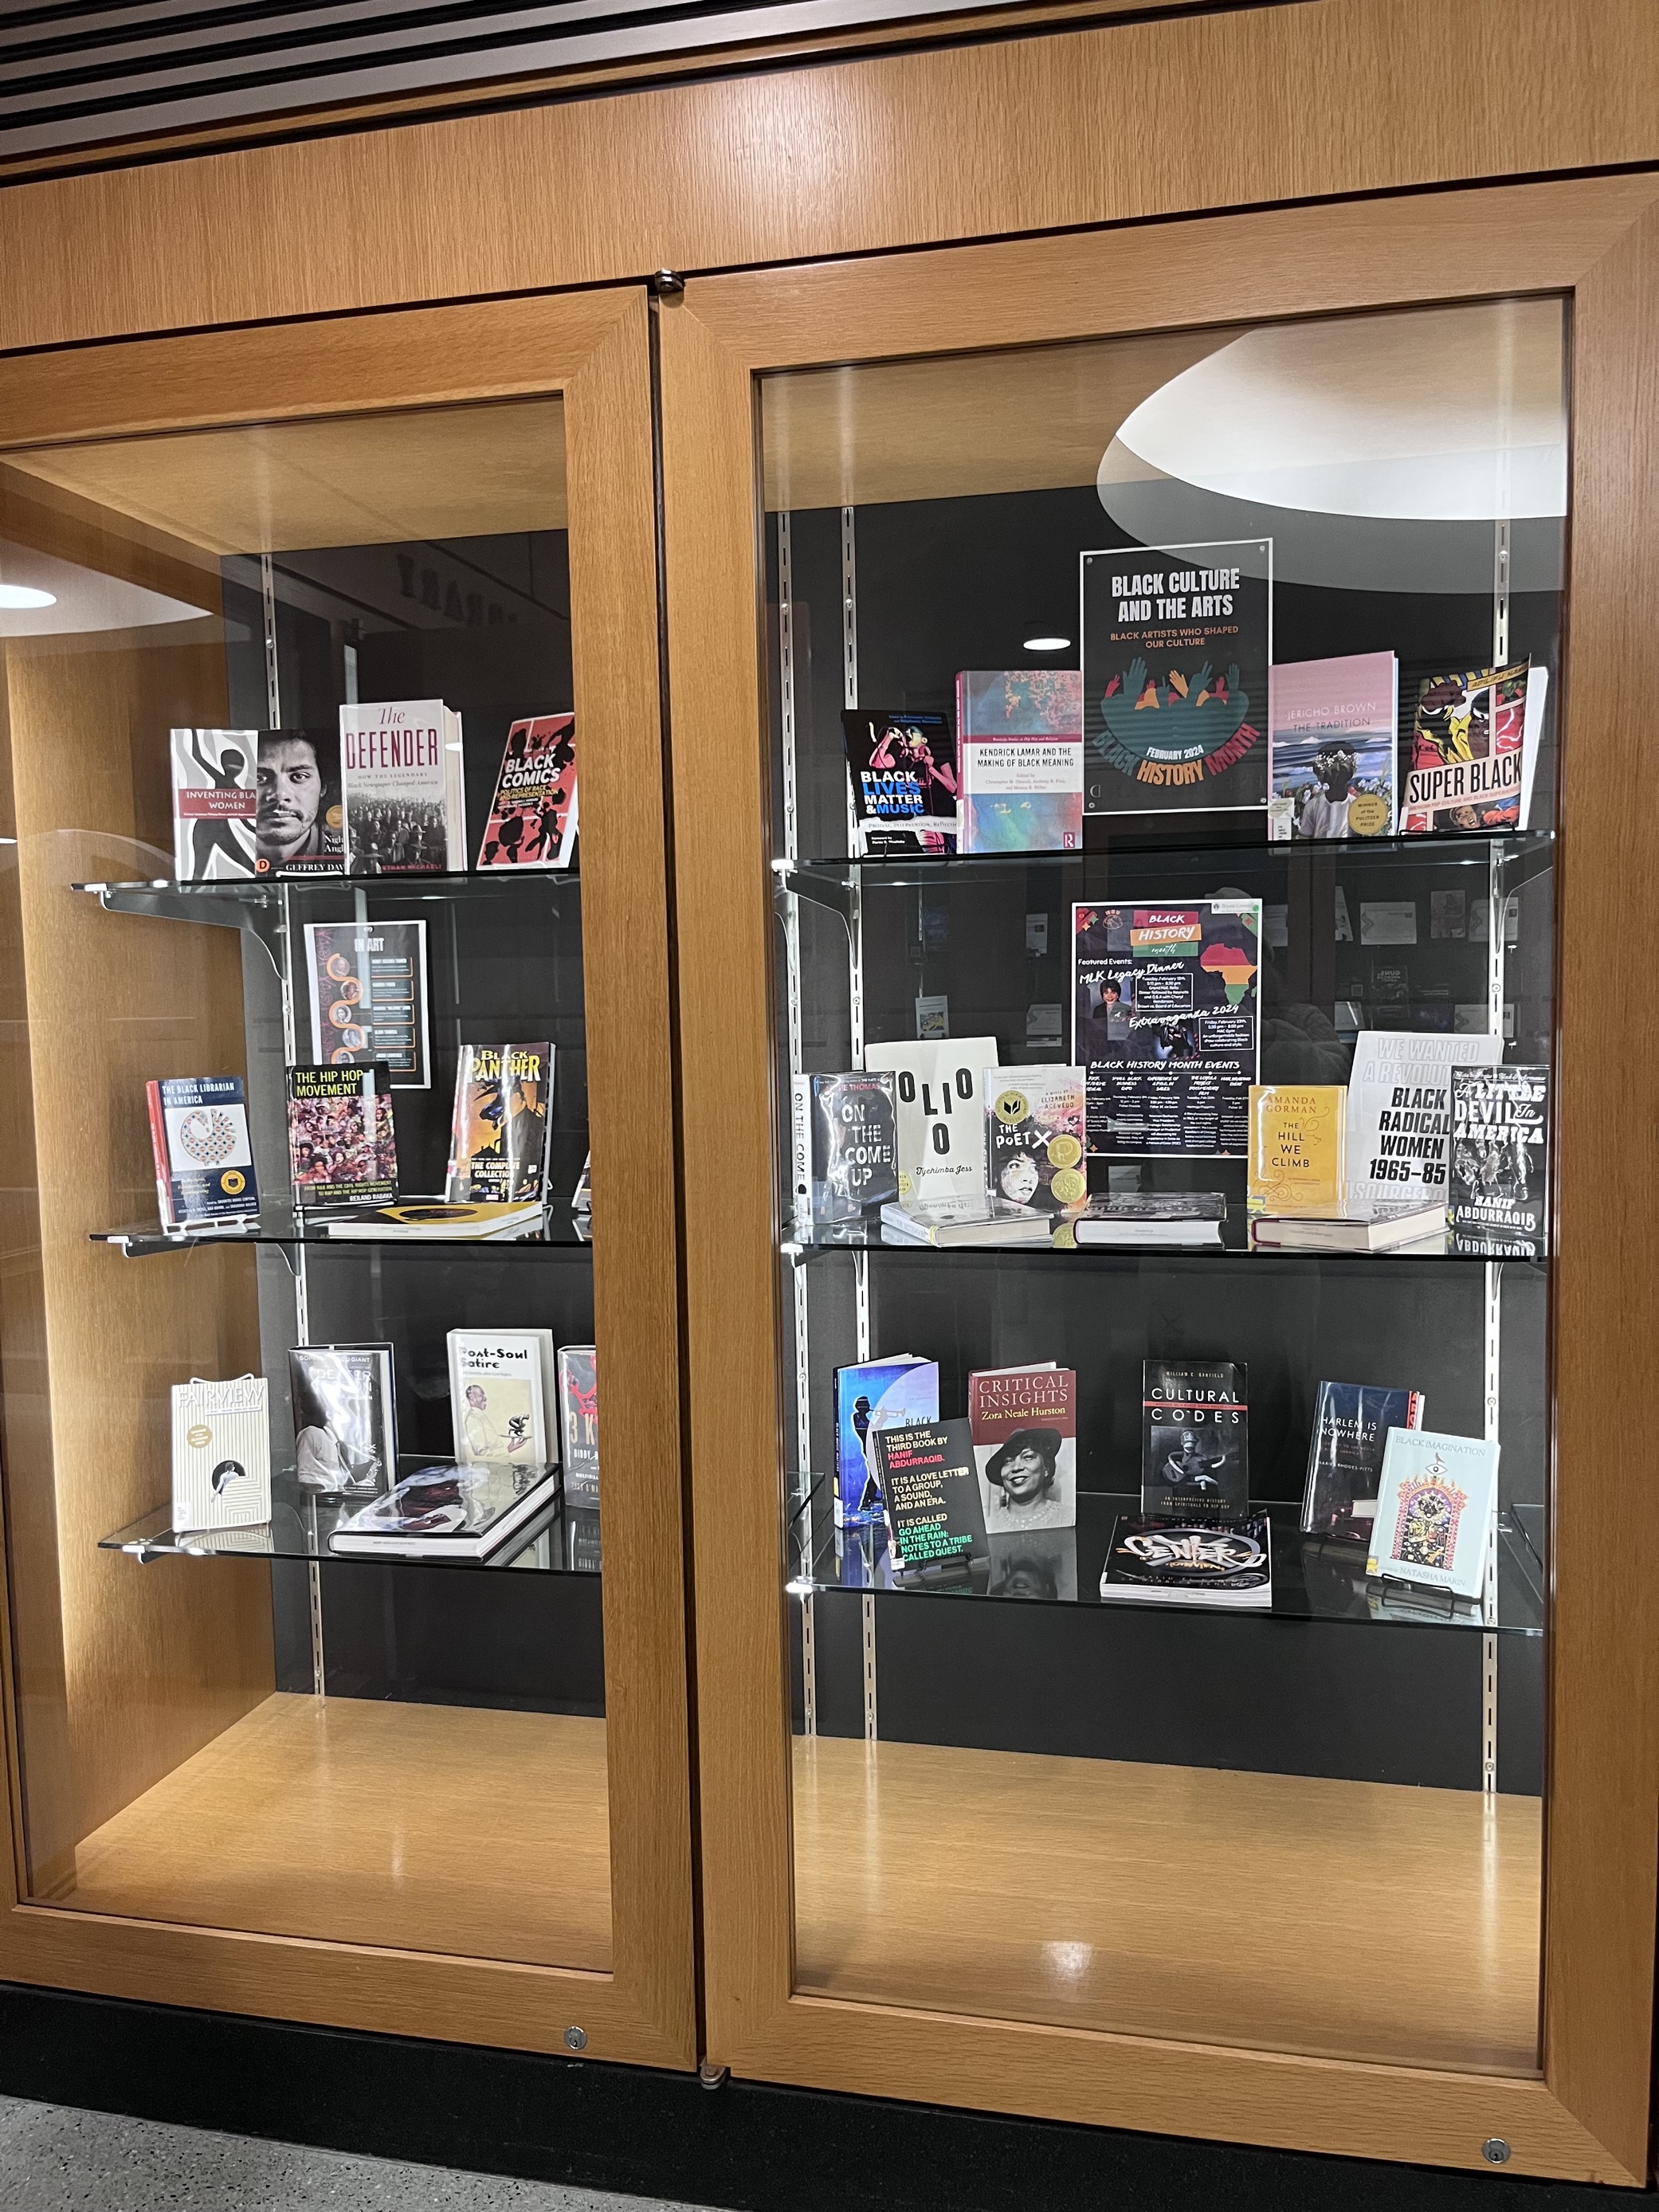 Photograph of Black culture and arts books in the exhibit case